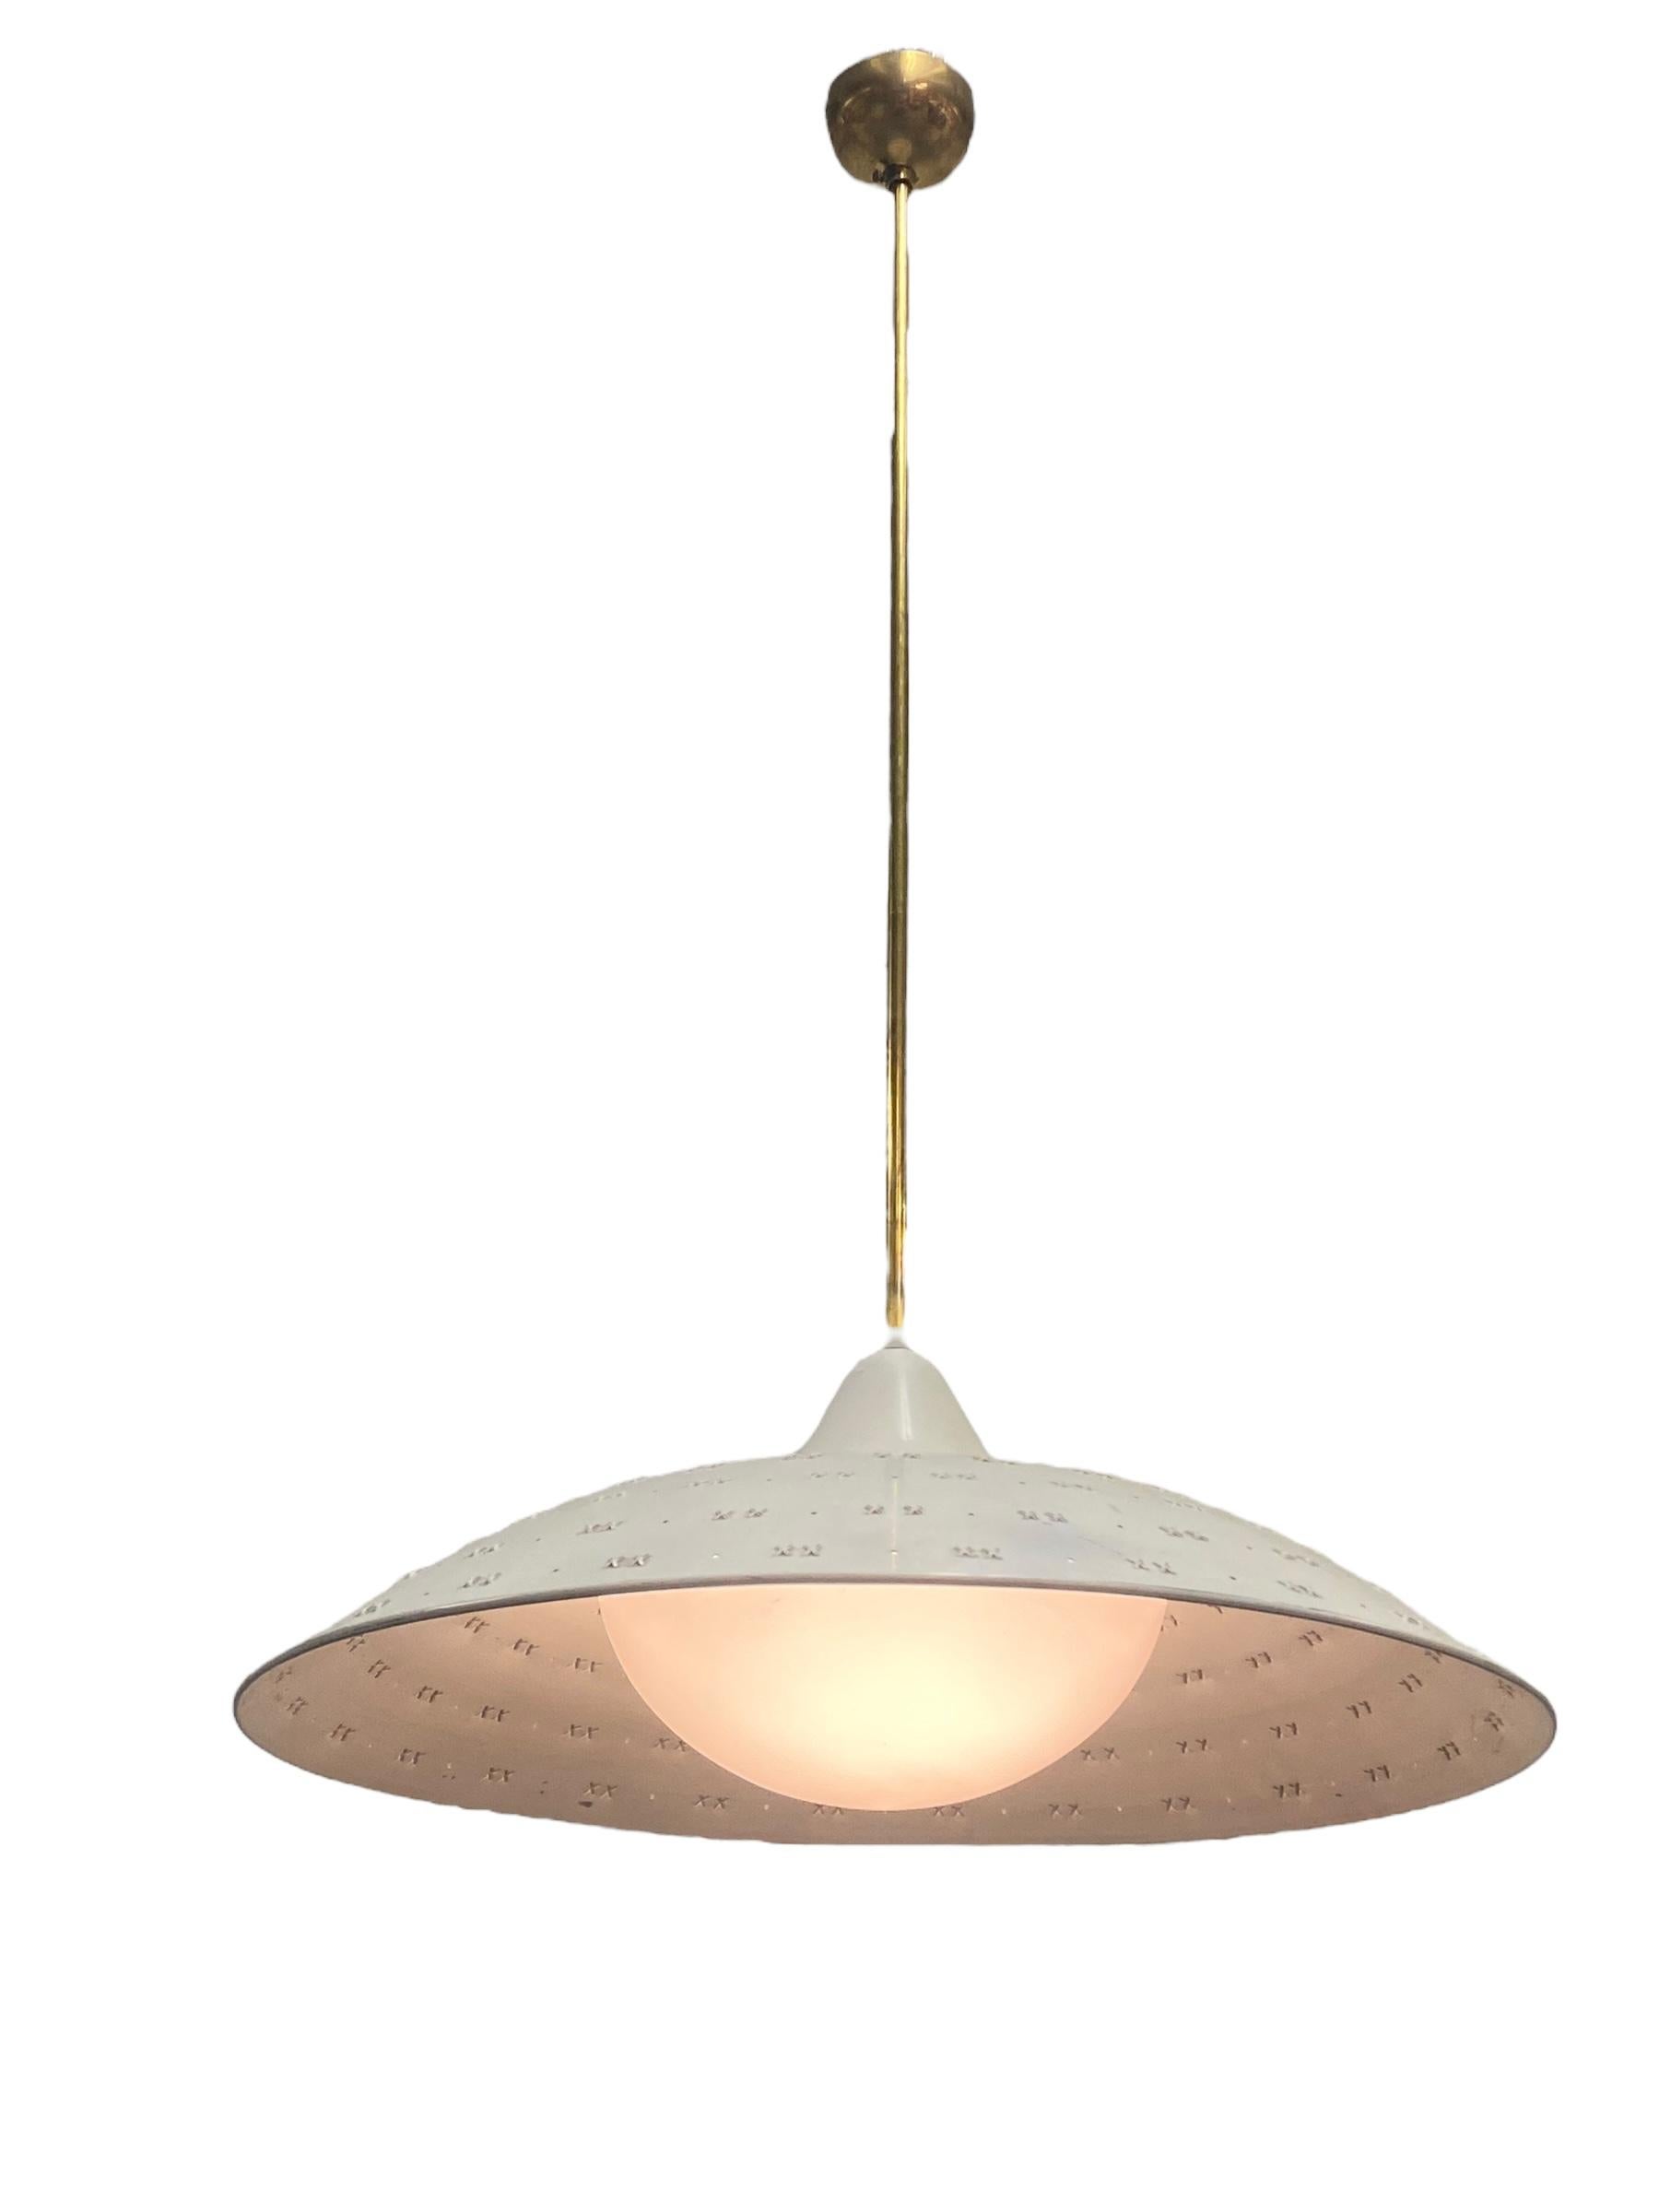 Mid-Century Modern A Rare Lisa-Johansson Pape Ceiling Lamp FN 03-433, Orno 1950s For Sale